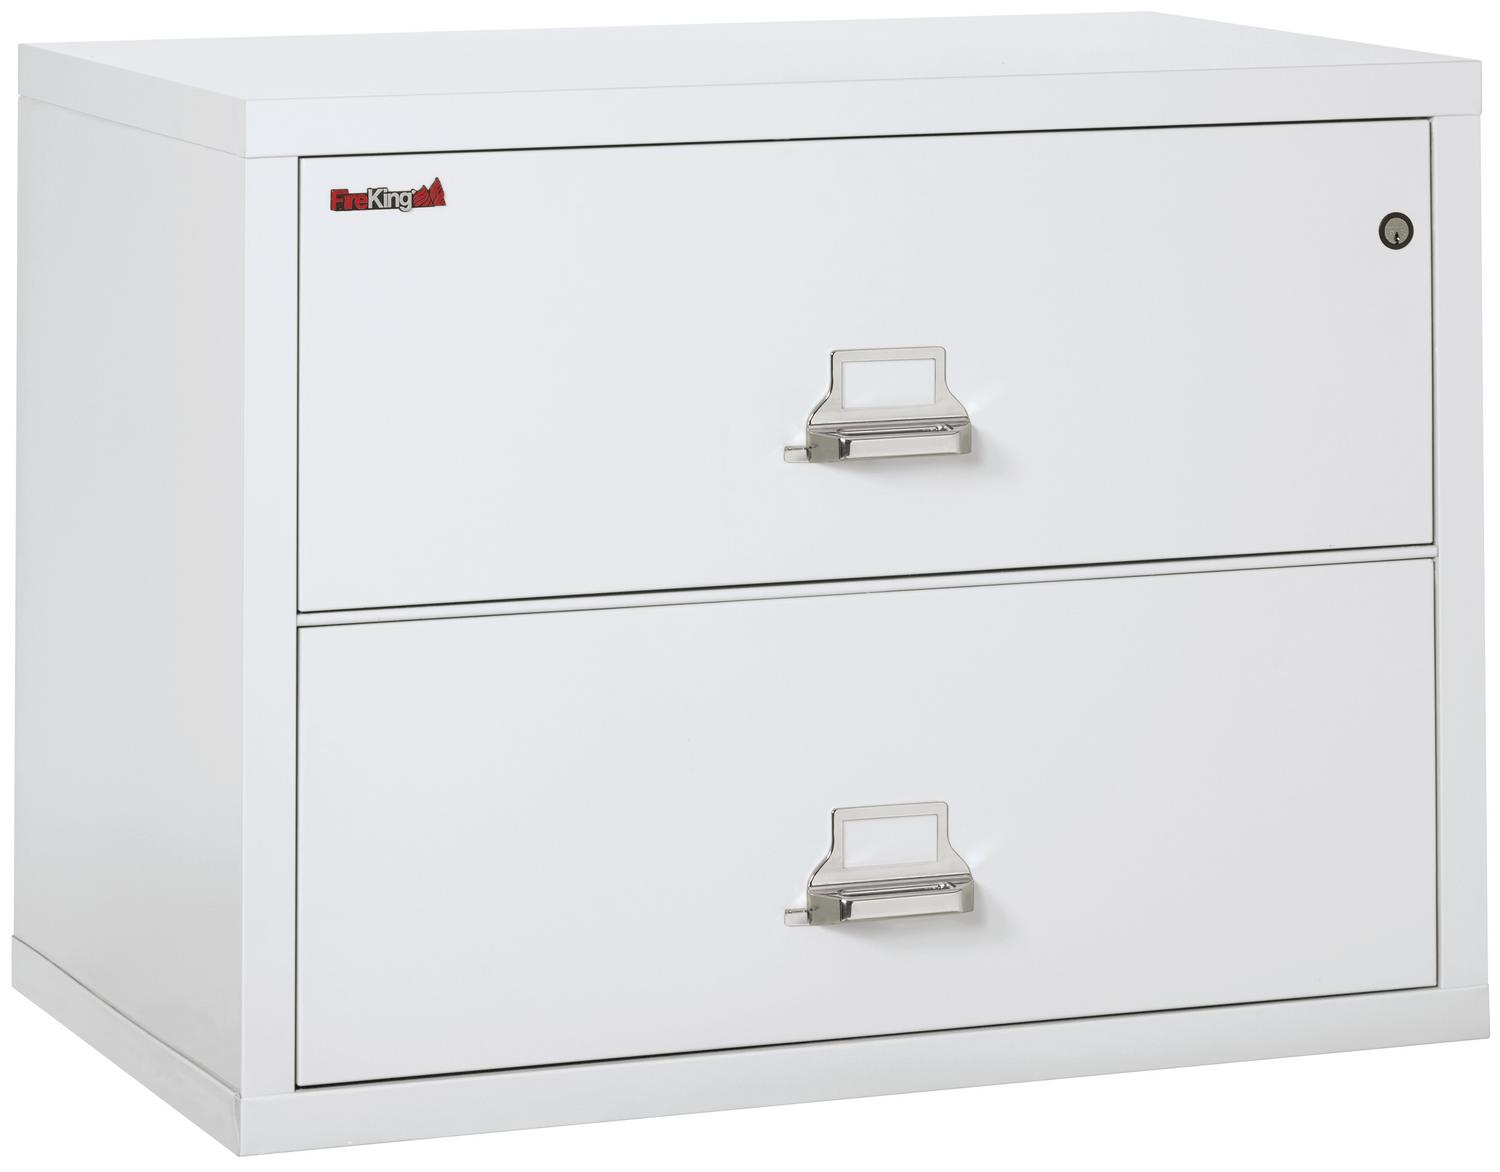 2 Drawer Fireproof Lateral File 38 Inch FireKing